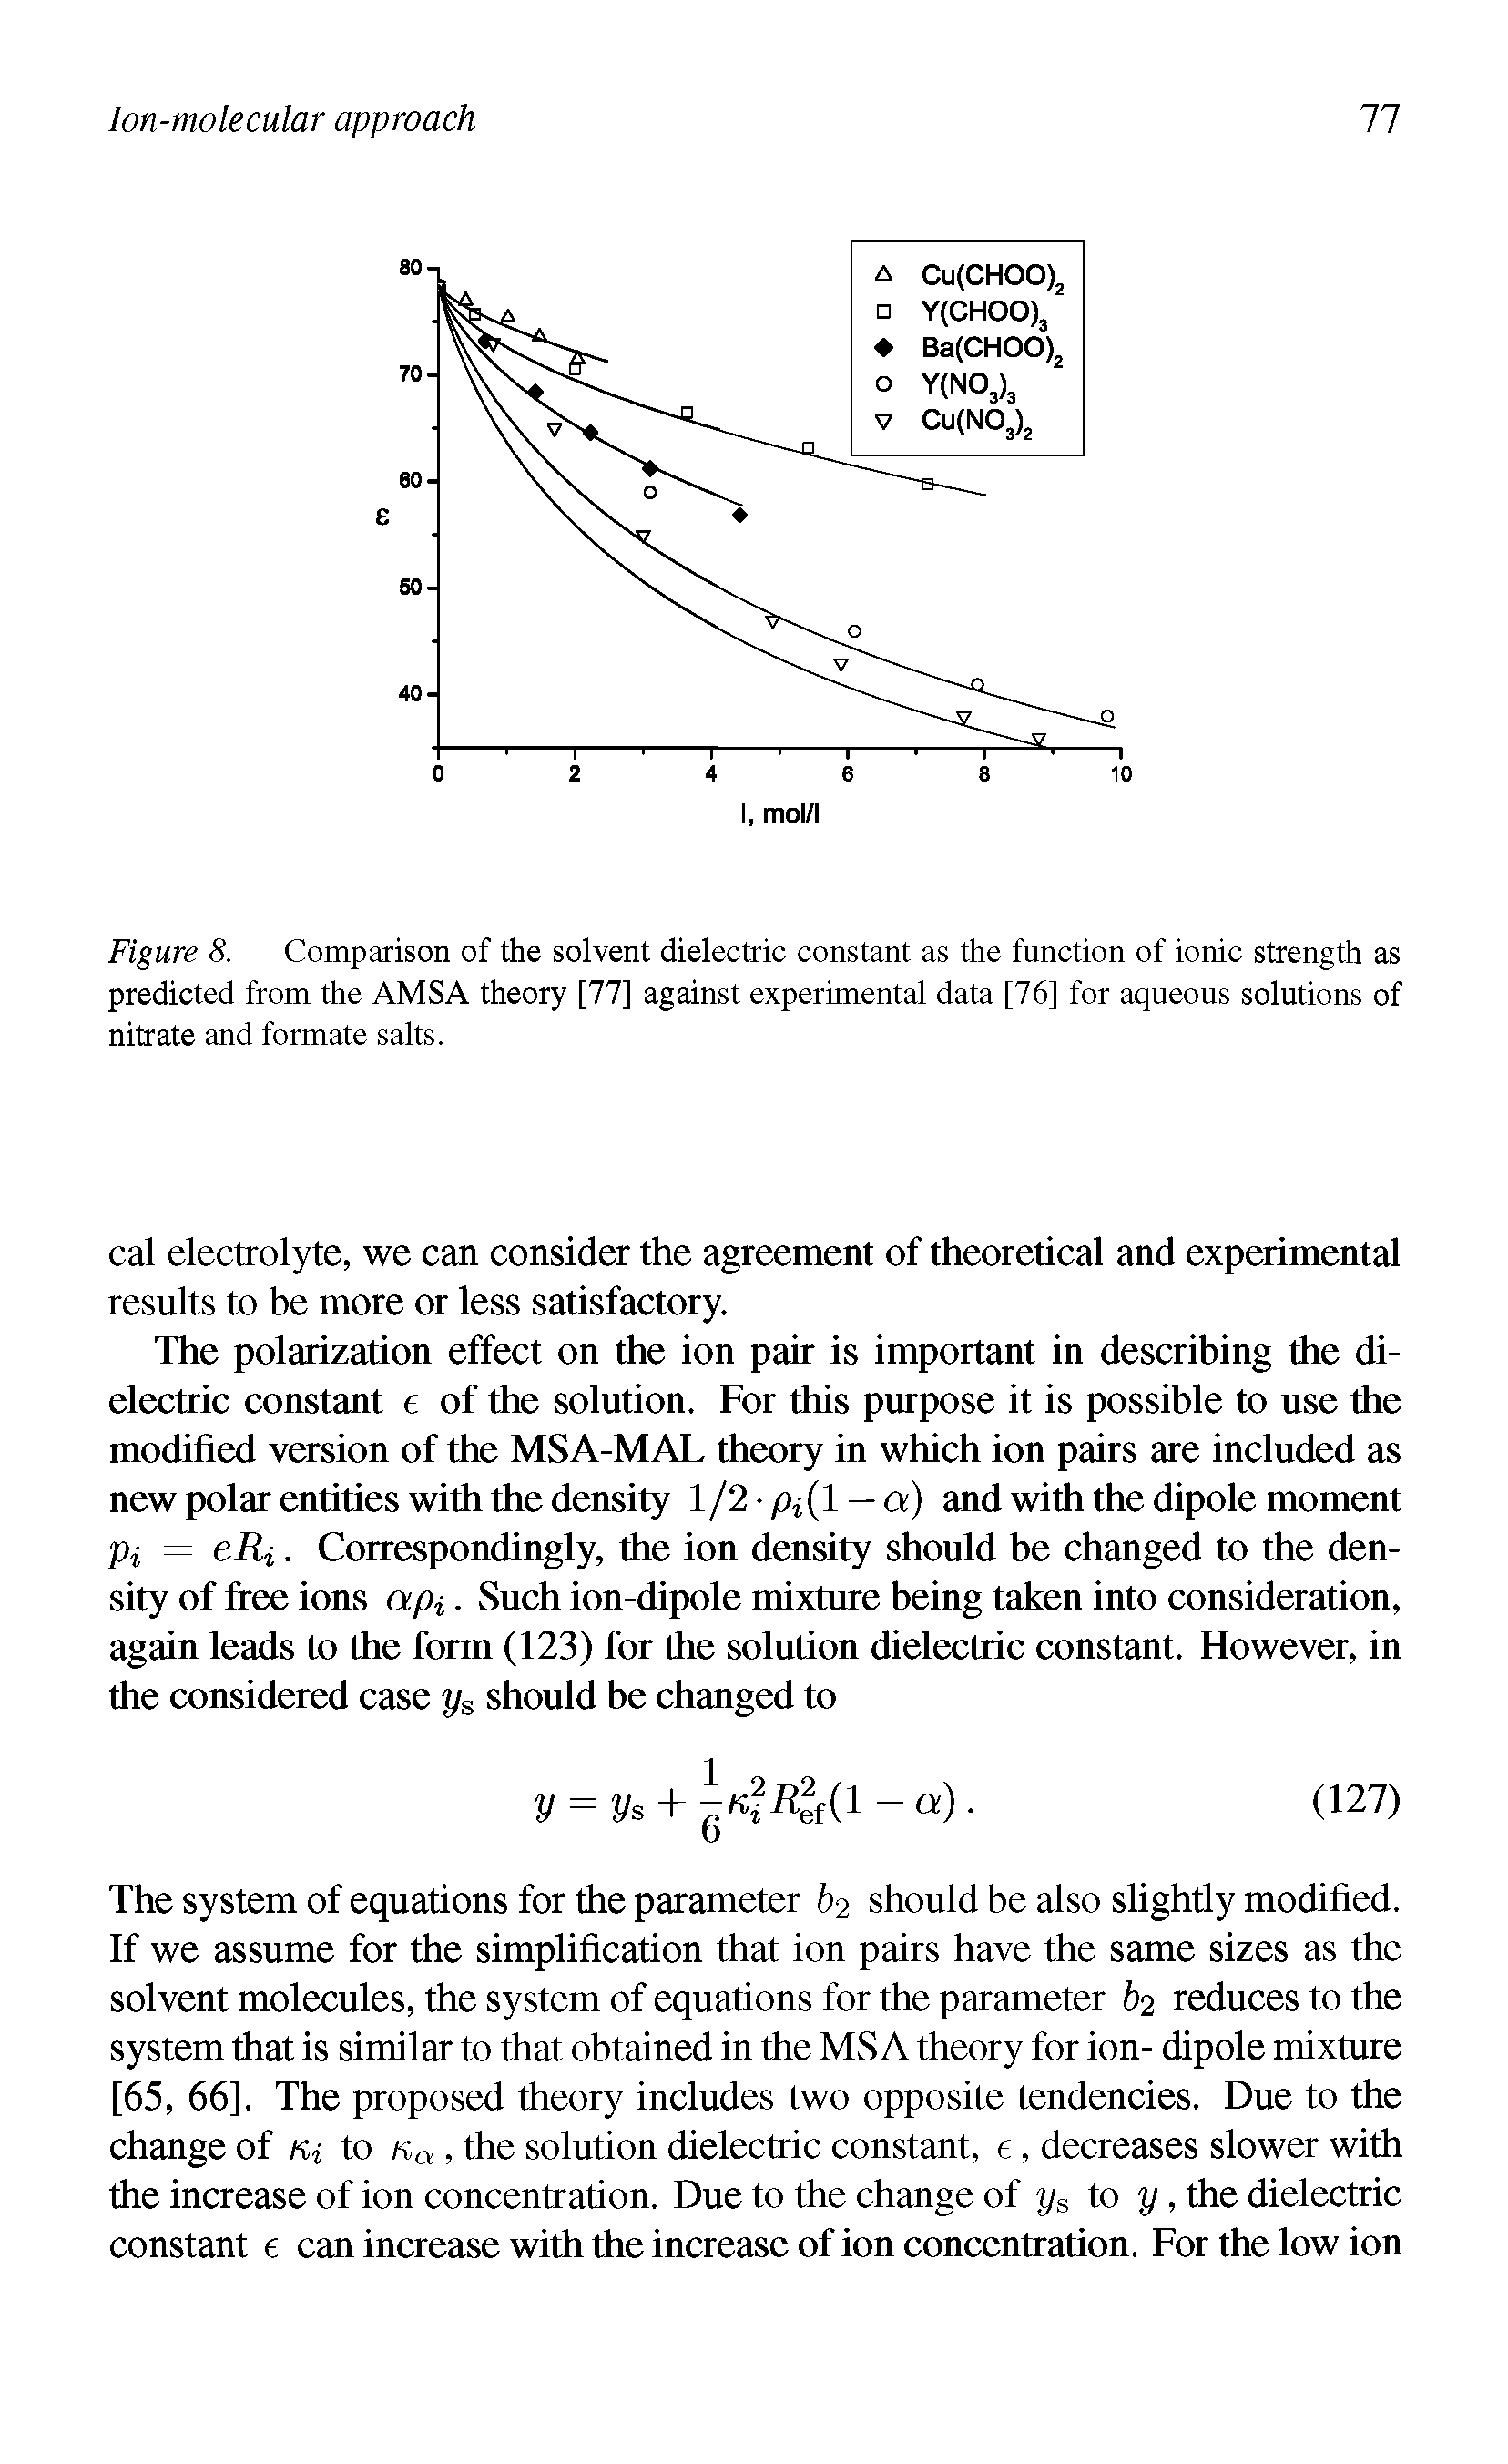 Figure 8. Comparison of the solvent dielectric constant as the function of ionic strength as predicted from the AMSA theory [77] against experimental data [76] for aqueous solutions of nitrate and formate salts.